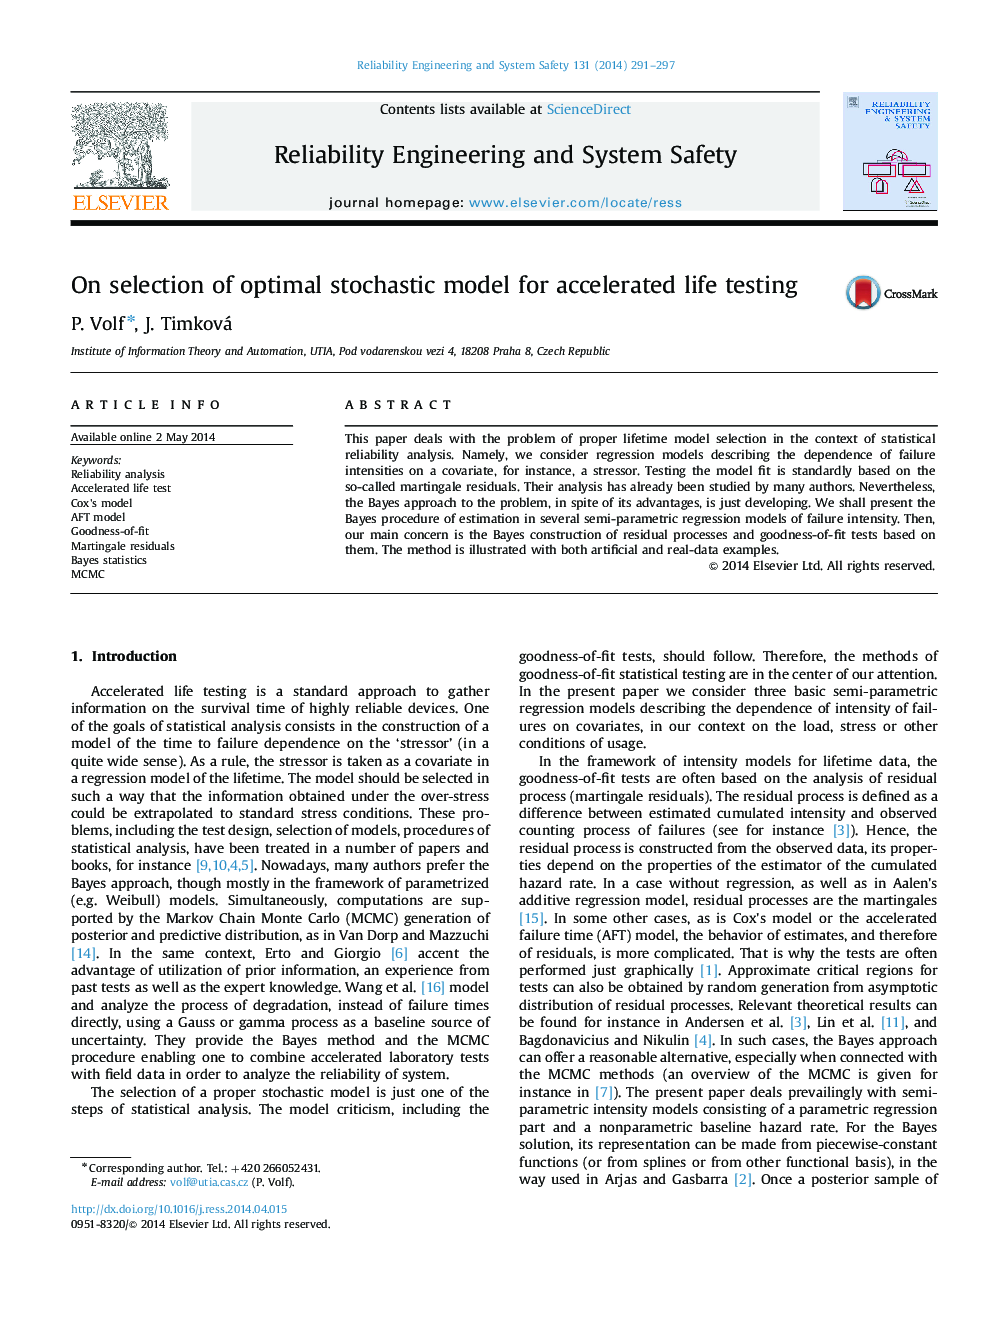 On selection of optimal stochastic model for accelerated life testing